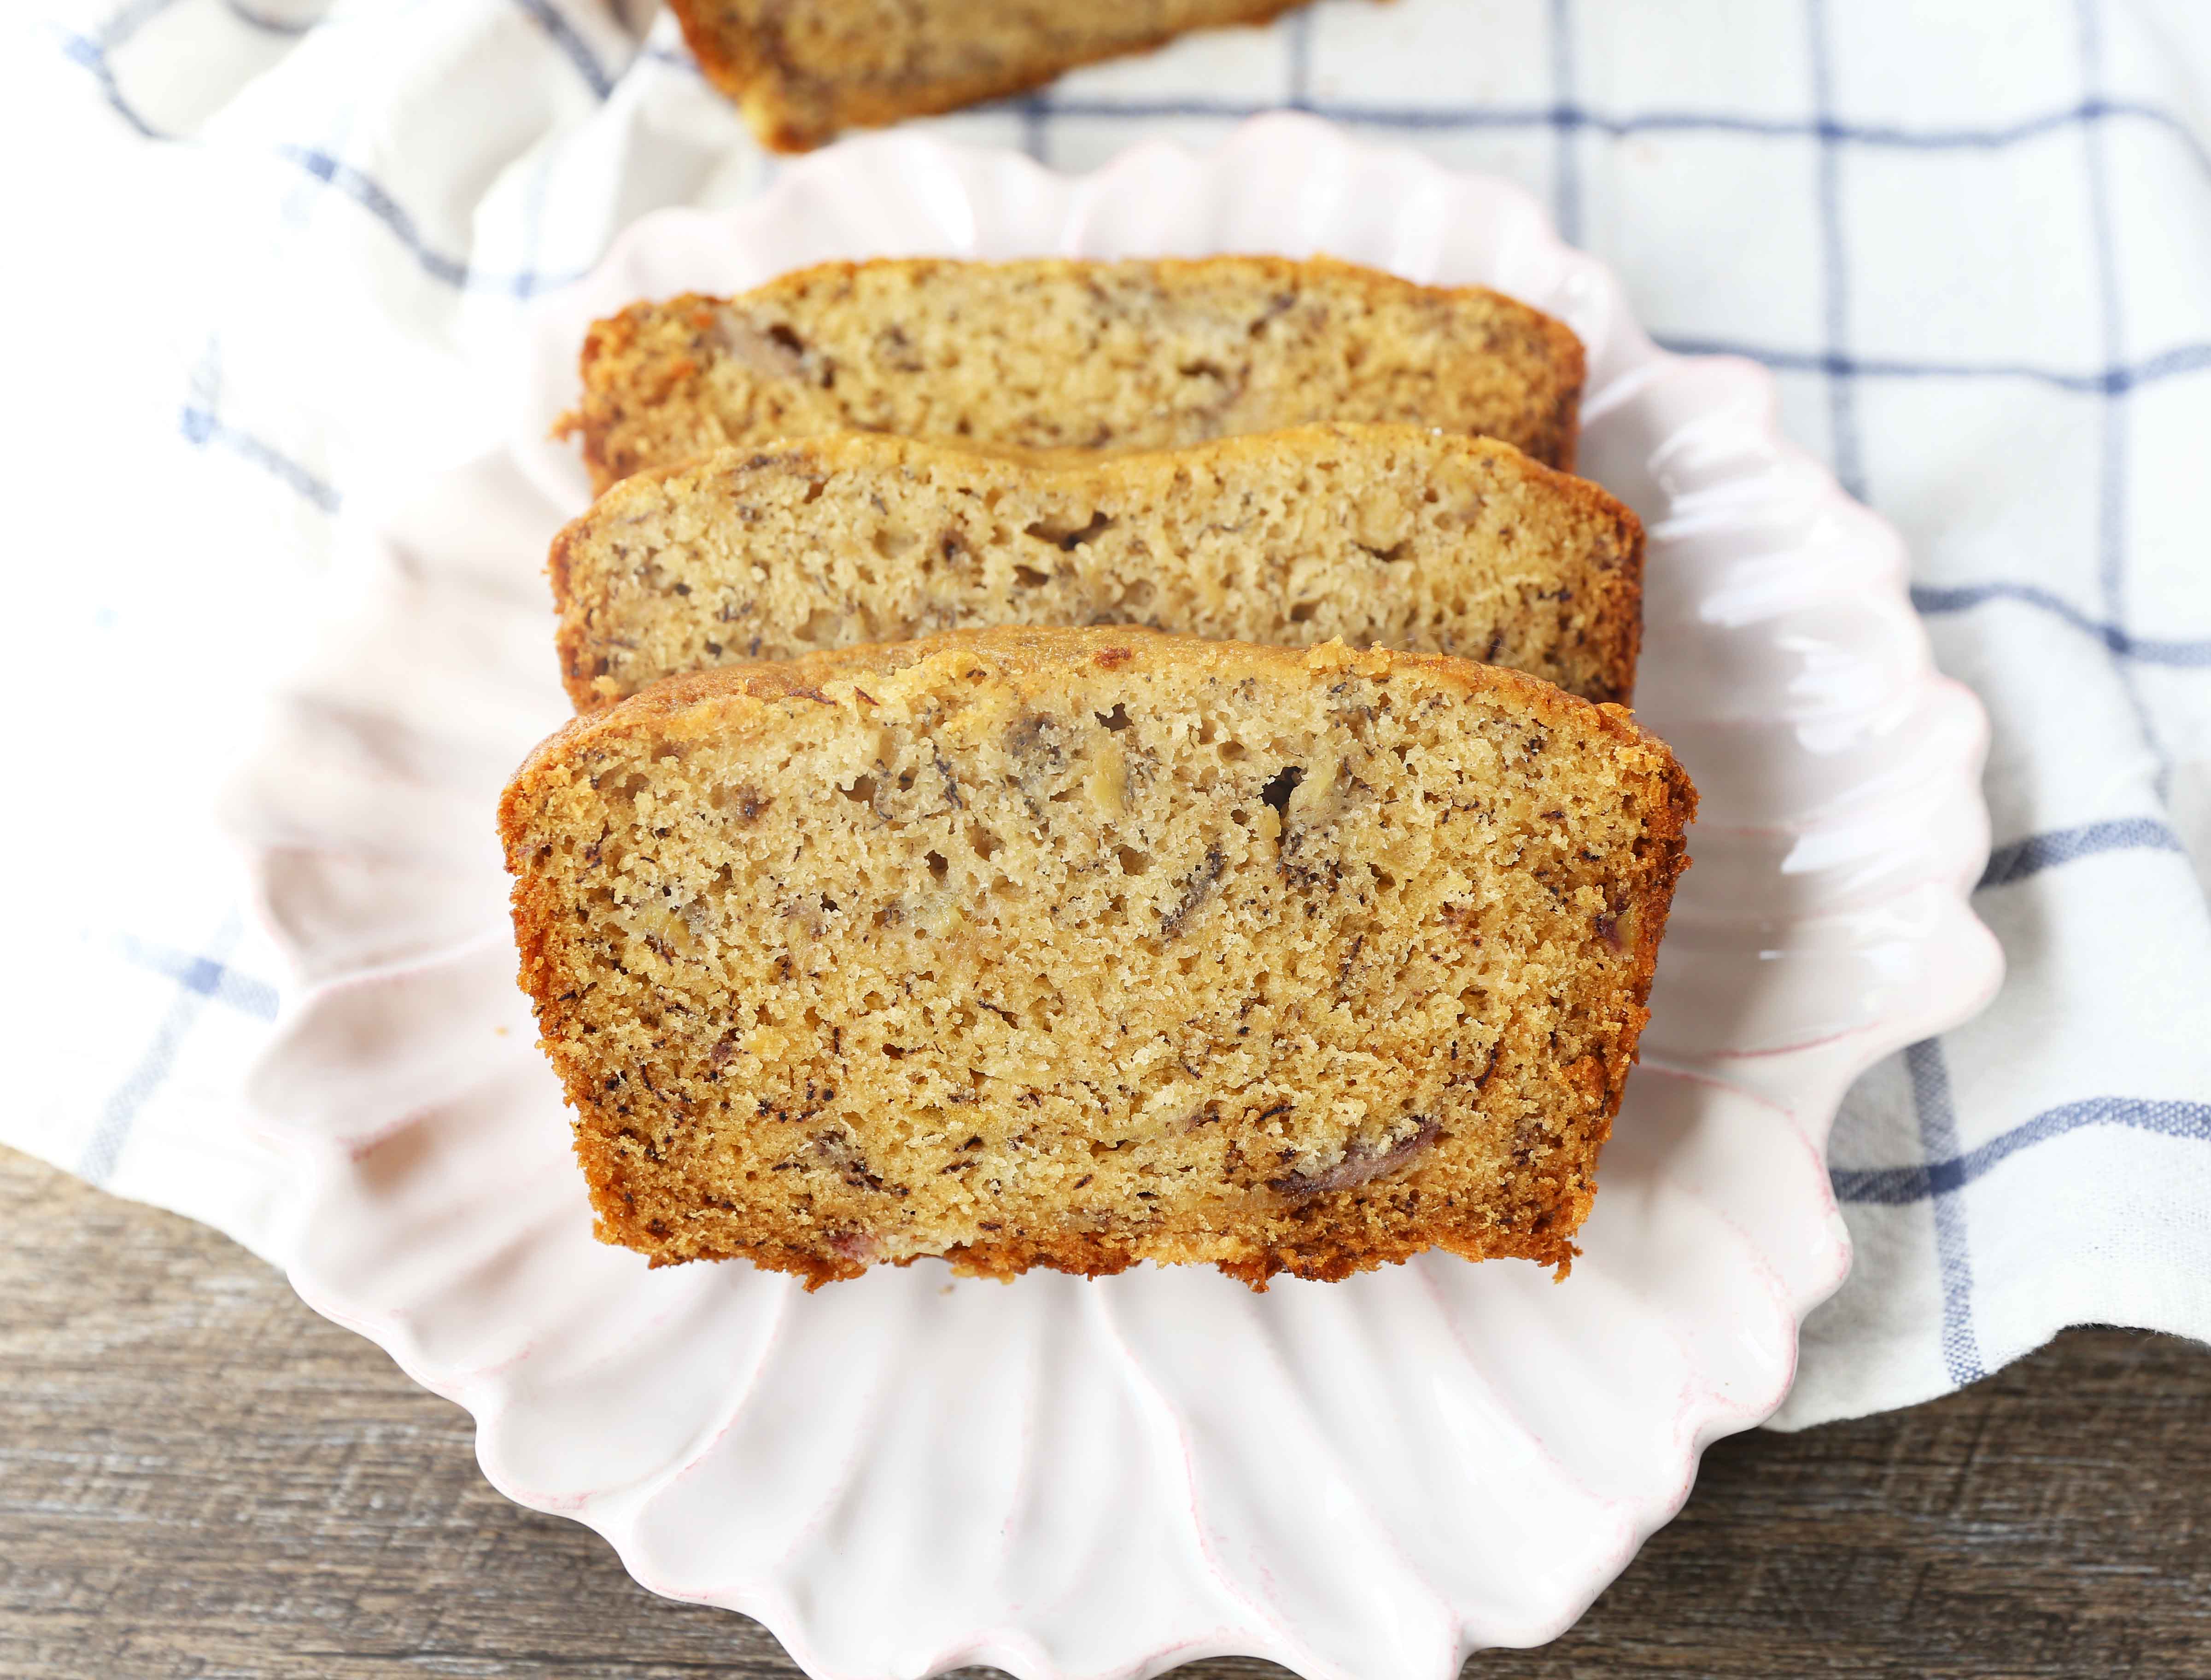 The BEST Banana Bread Recipe. How to make the perfect moist and flavorful banana bread recipe that is worthy of being slathered in butter. The best banana bread recipe! www.modernhoney.com #bananabread #quickbread #bananarecipes